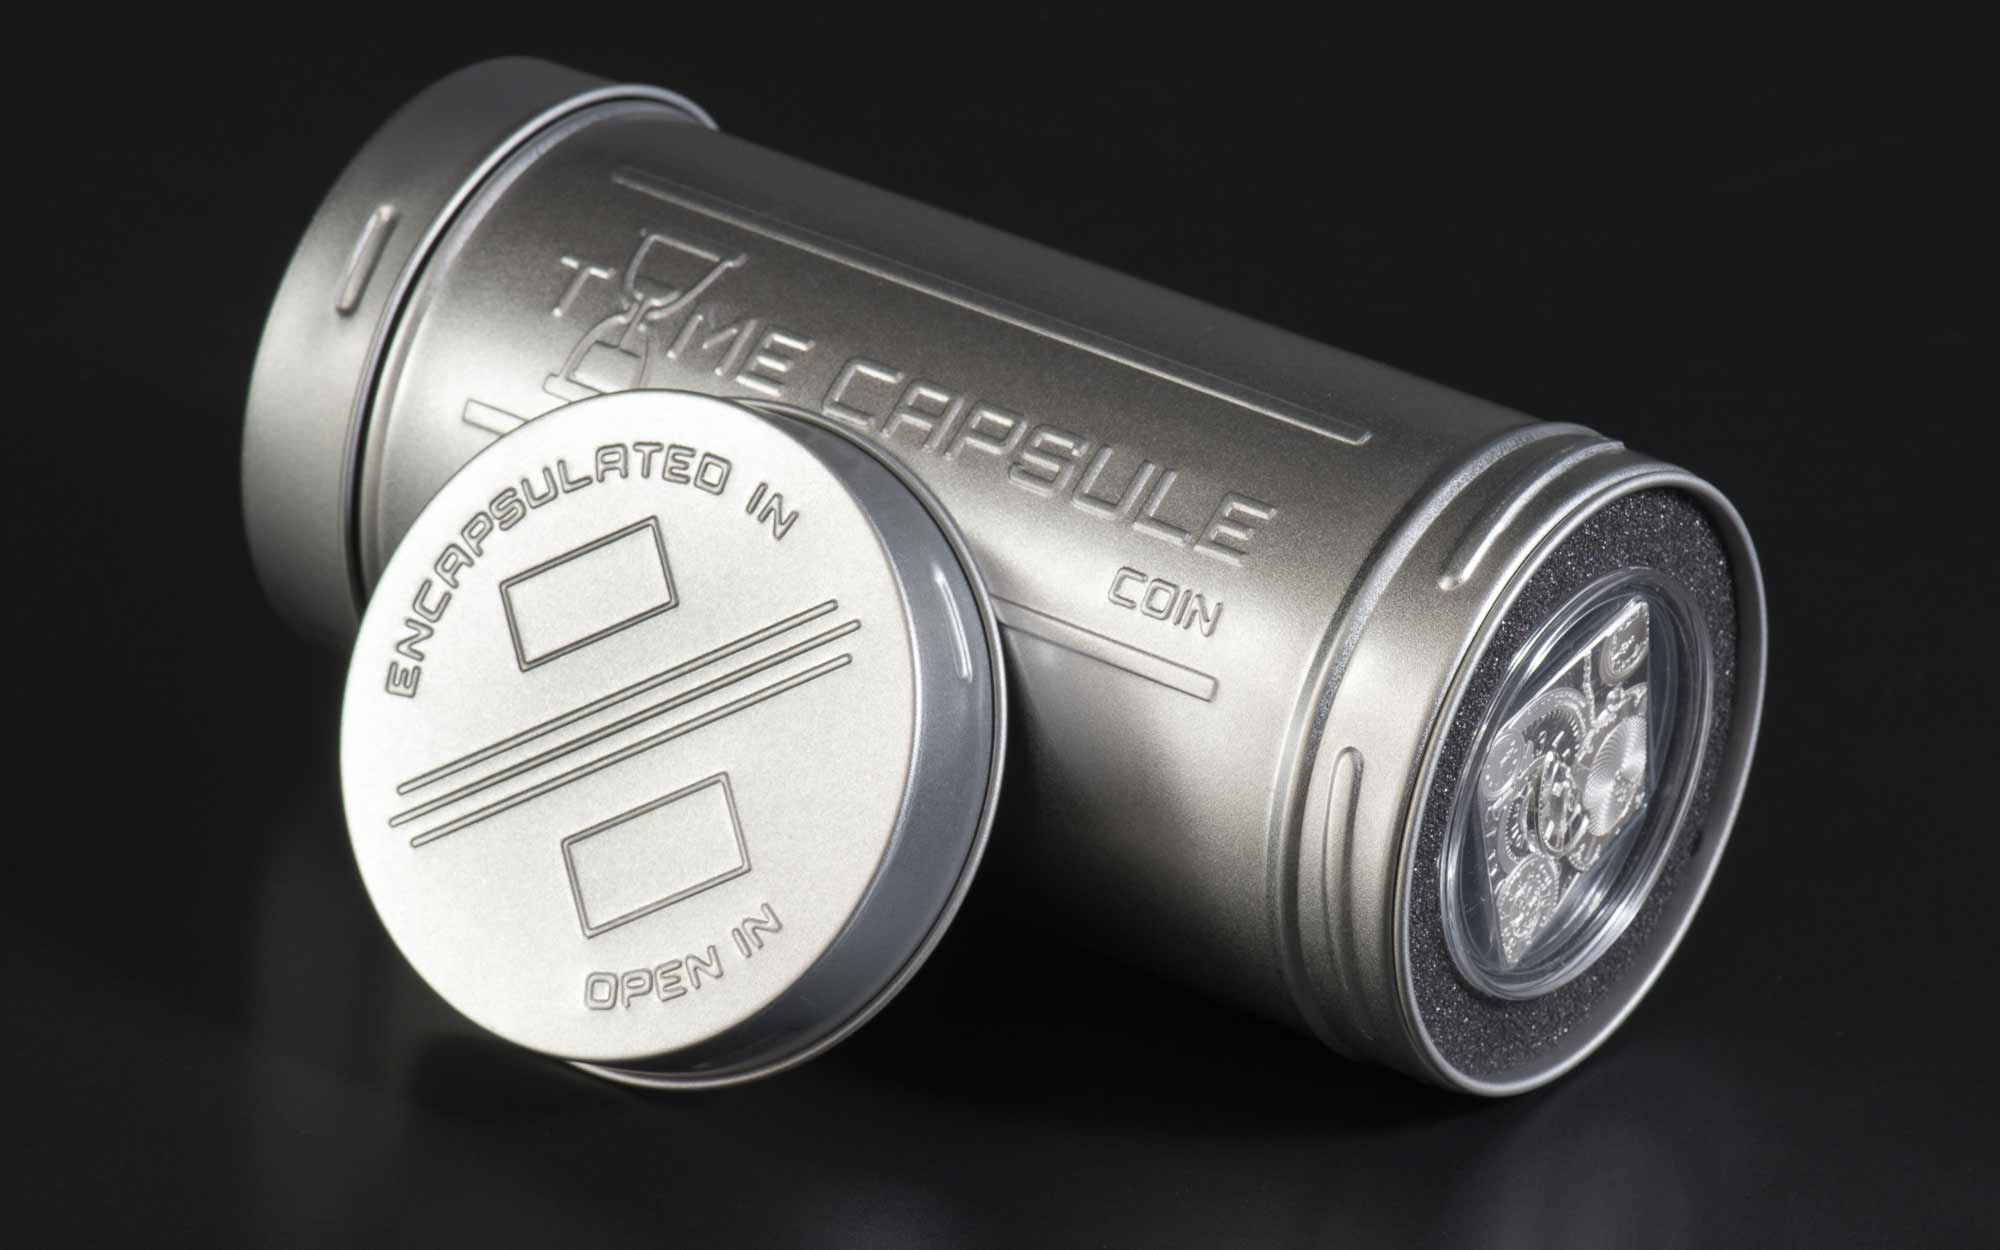 Time Capsule silver coin from CIT follows innovative ...